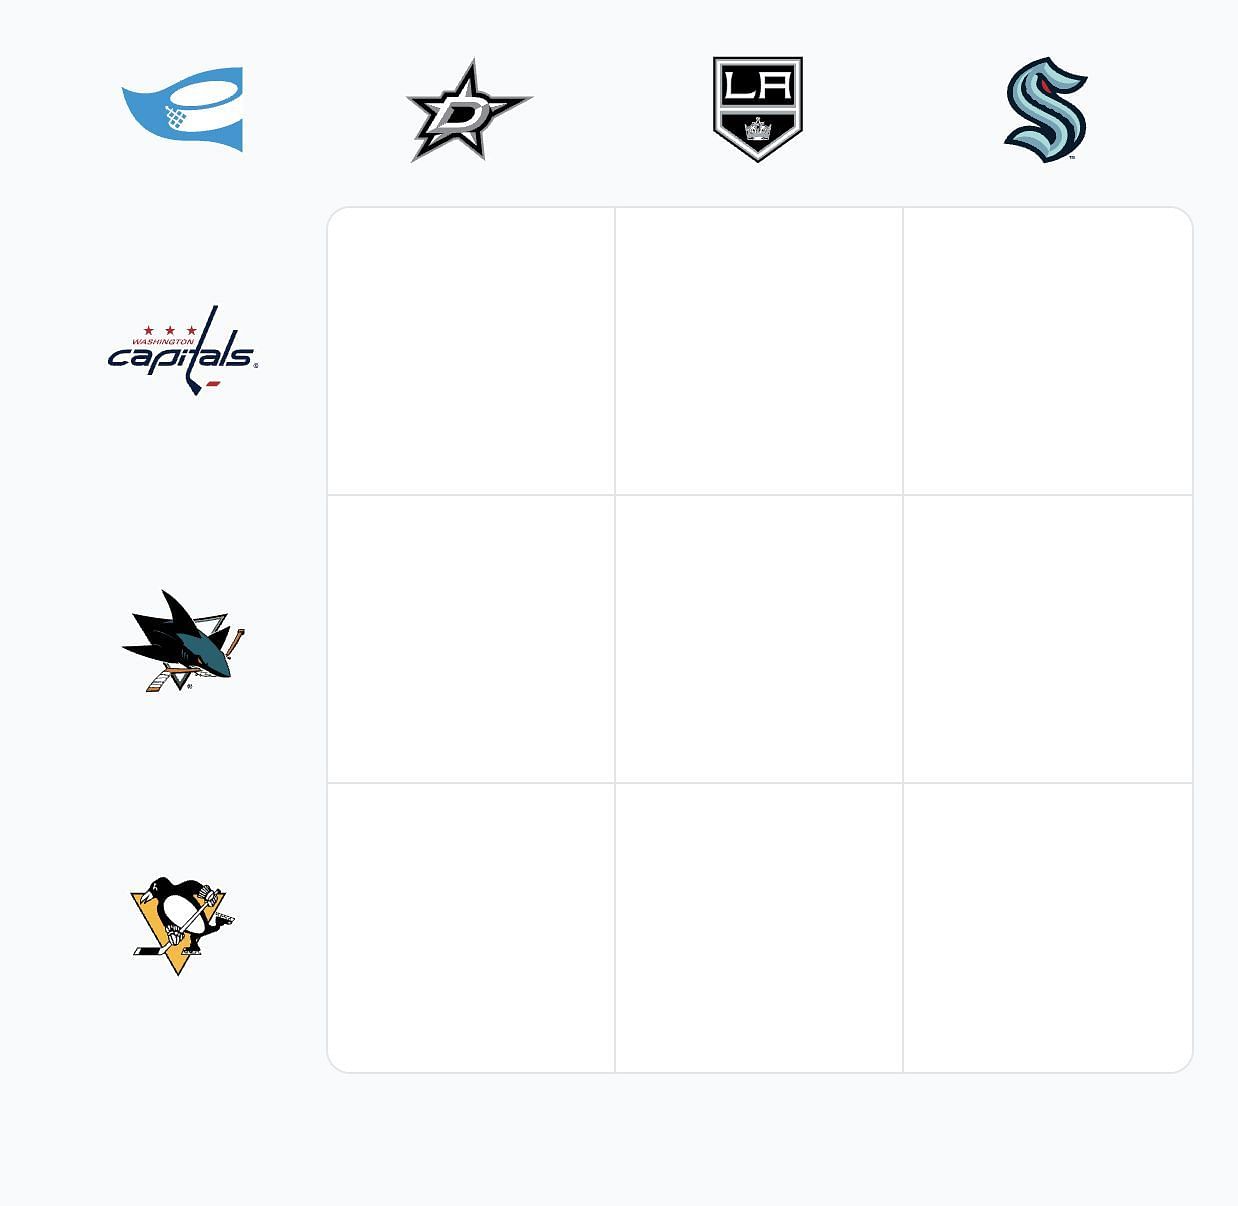 NHL Immaculate Grid answers for August 28